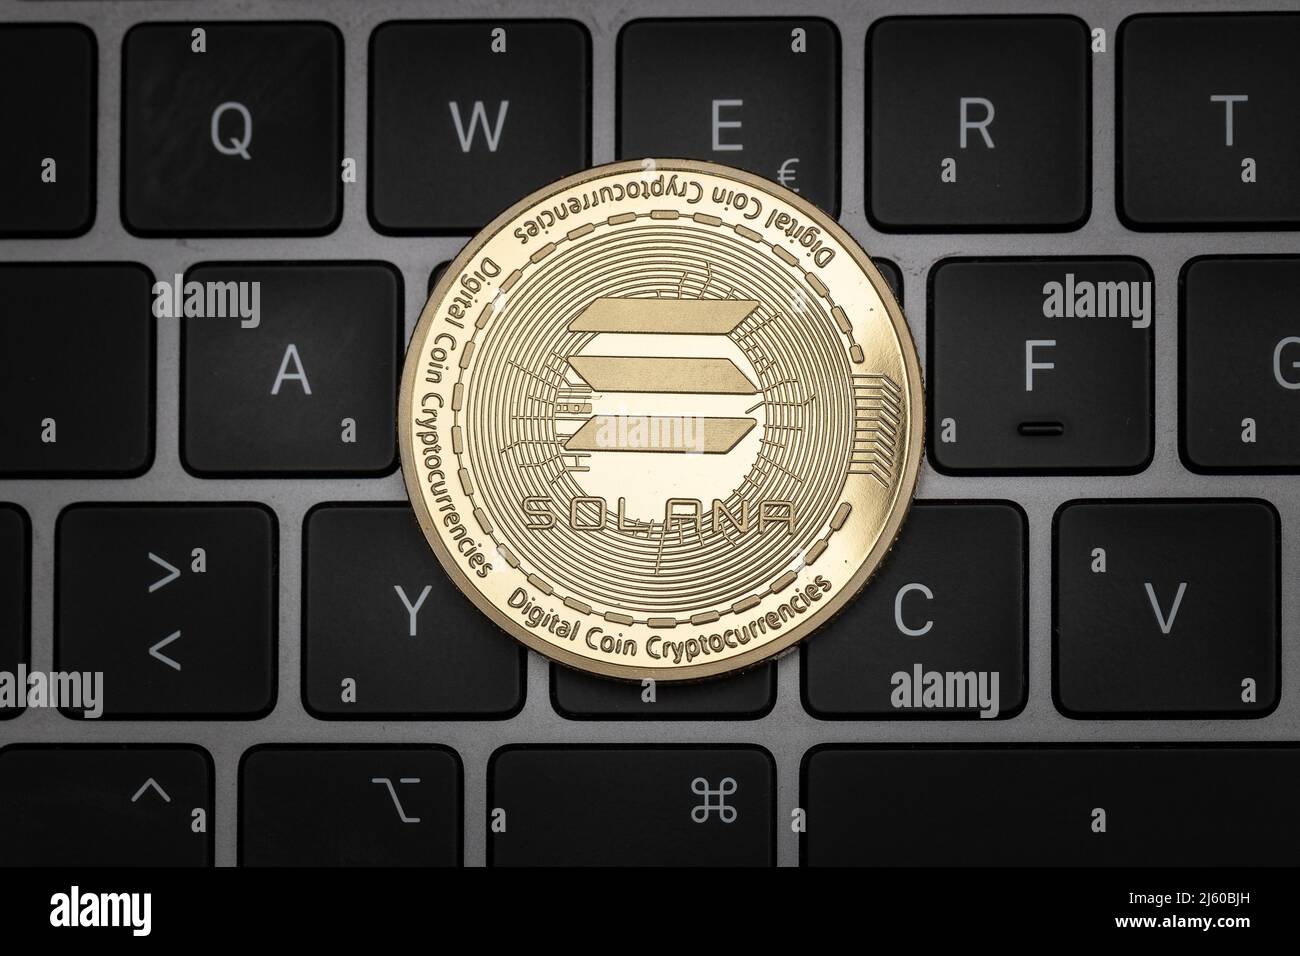 Solana SOL cryptocurrency physical coin on a keyboard. Stock Photo